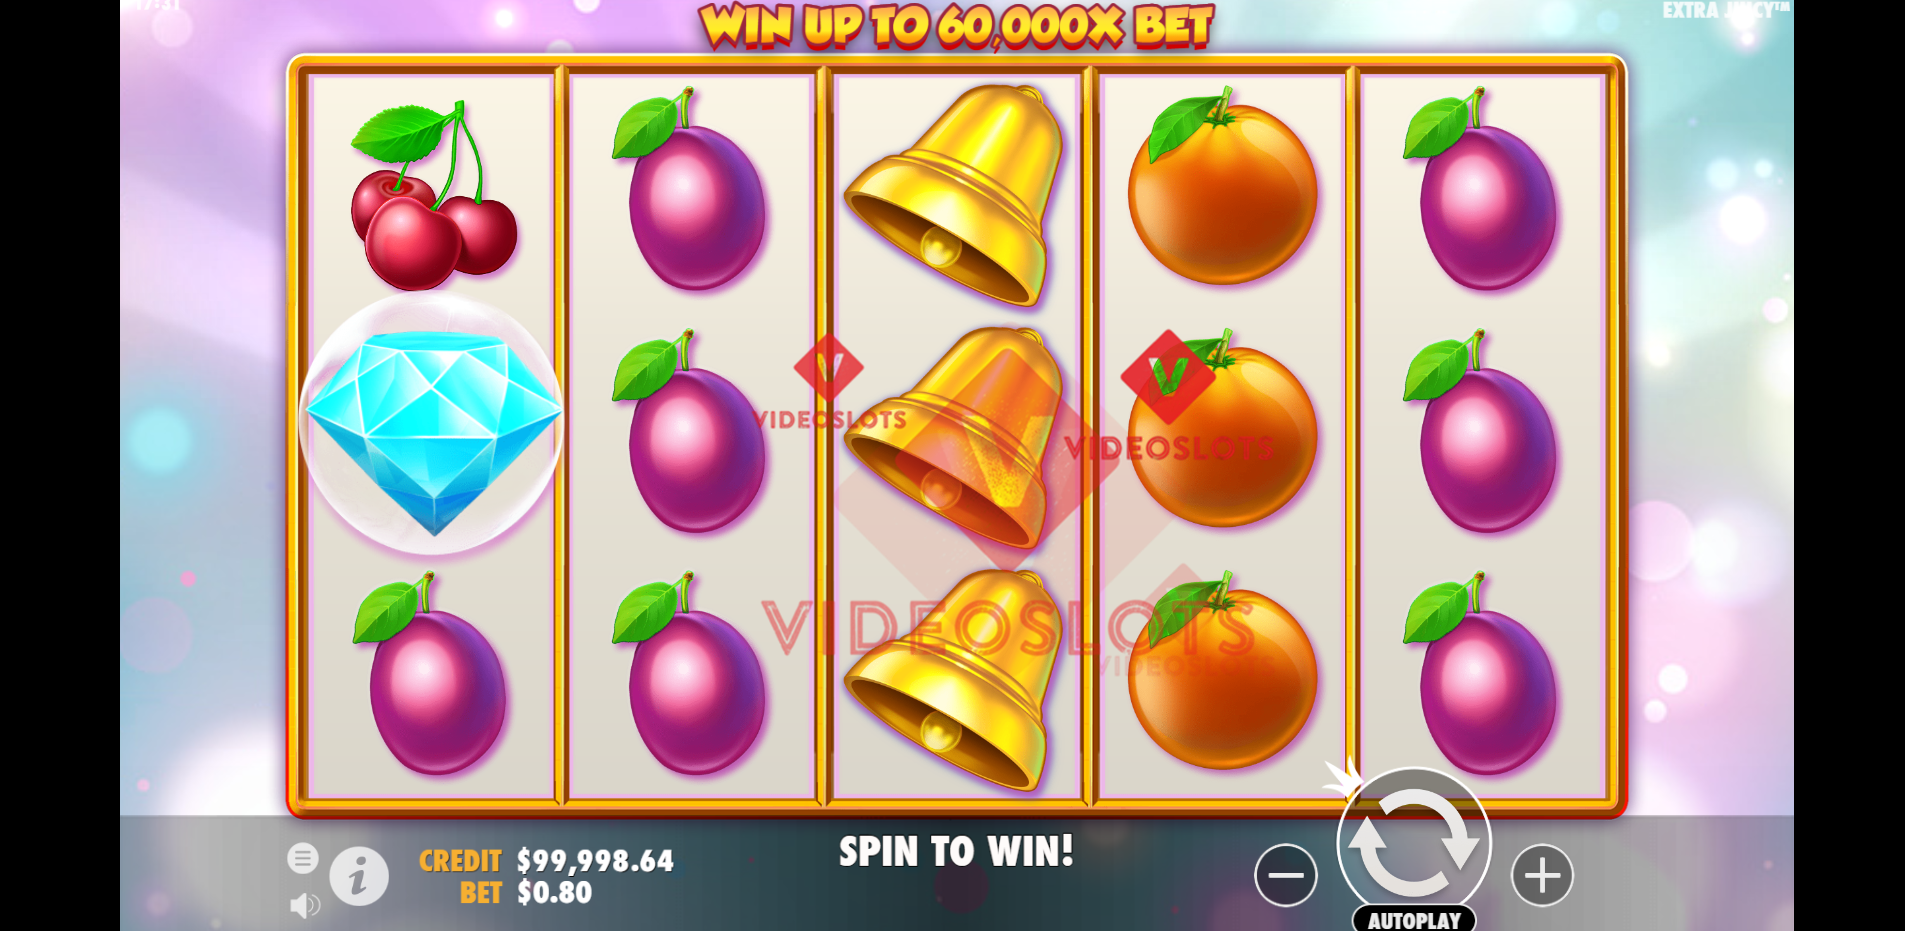 Base Game for Extra Juicy slot by Pragmatic Play